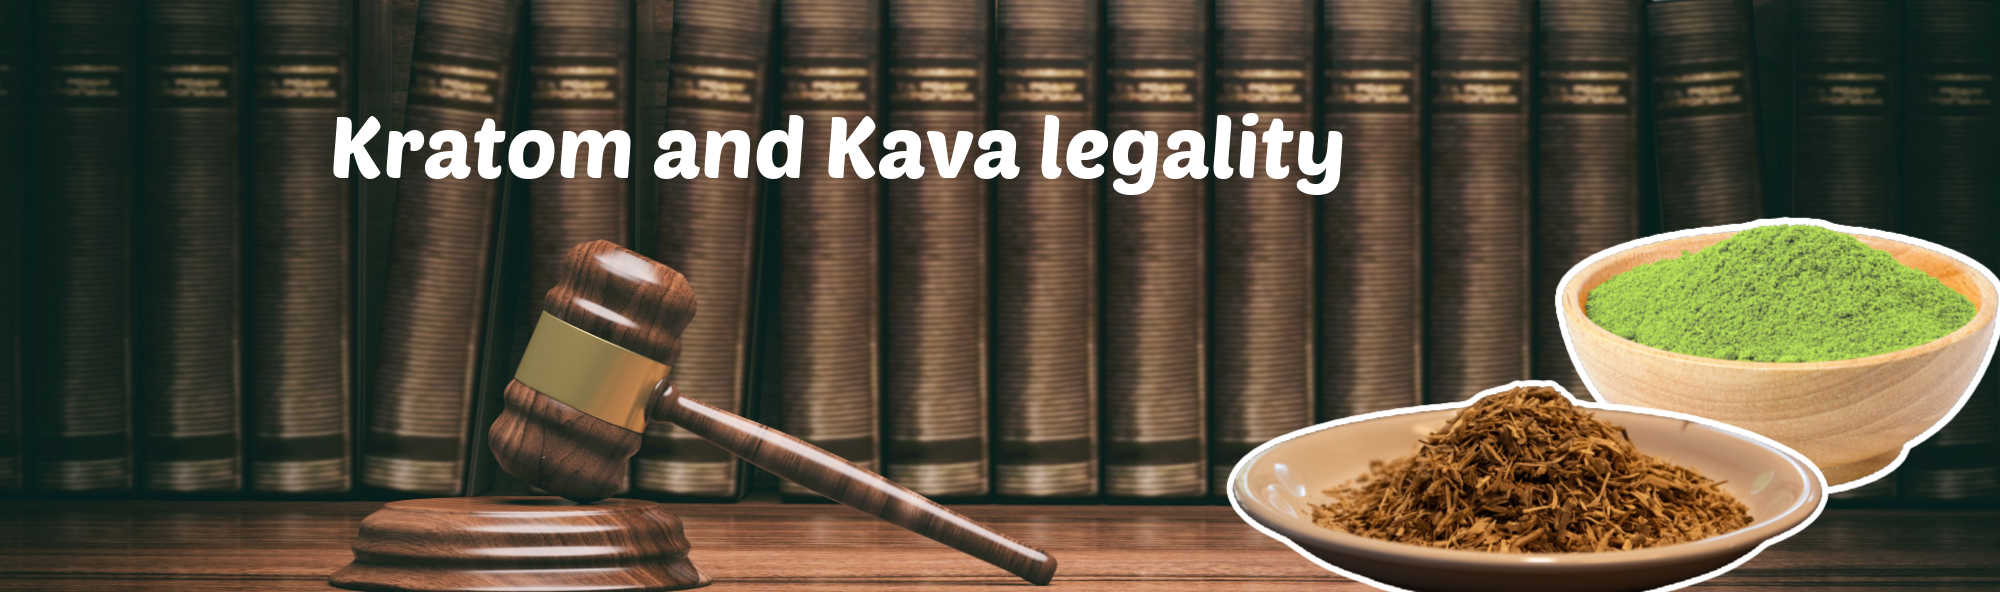 image of legality of kratom and kava